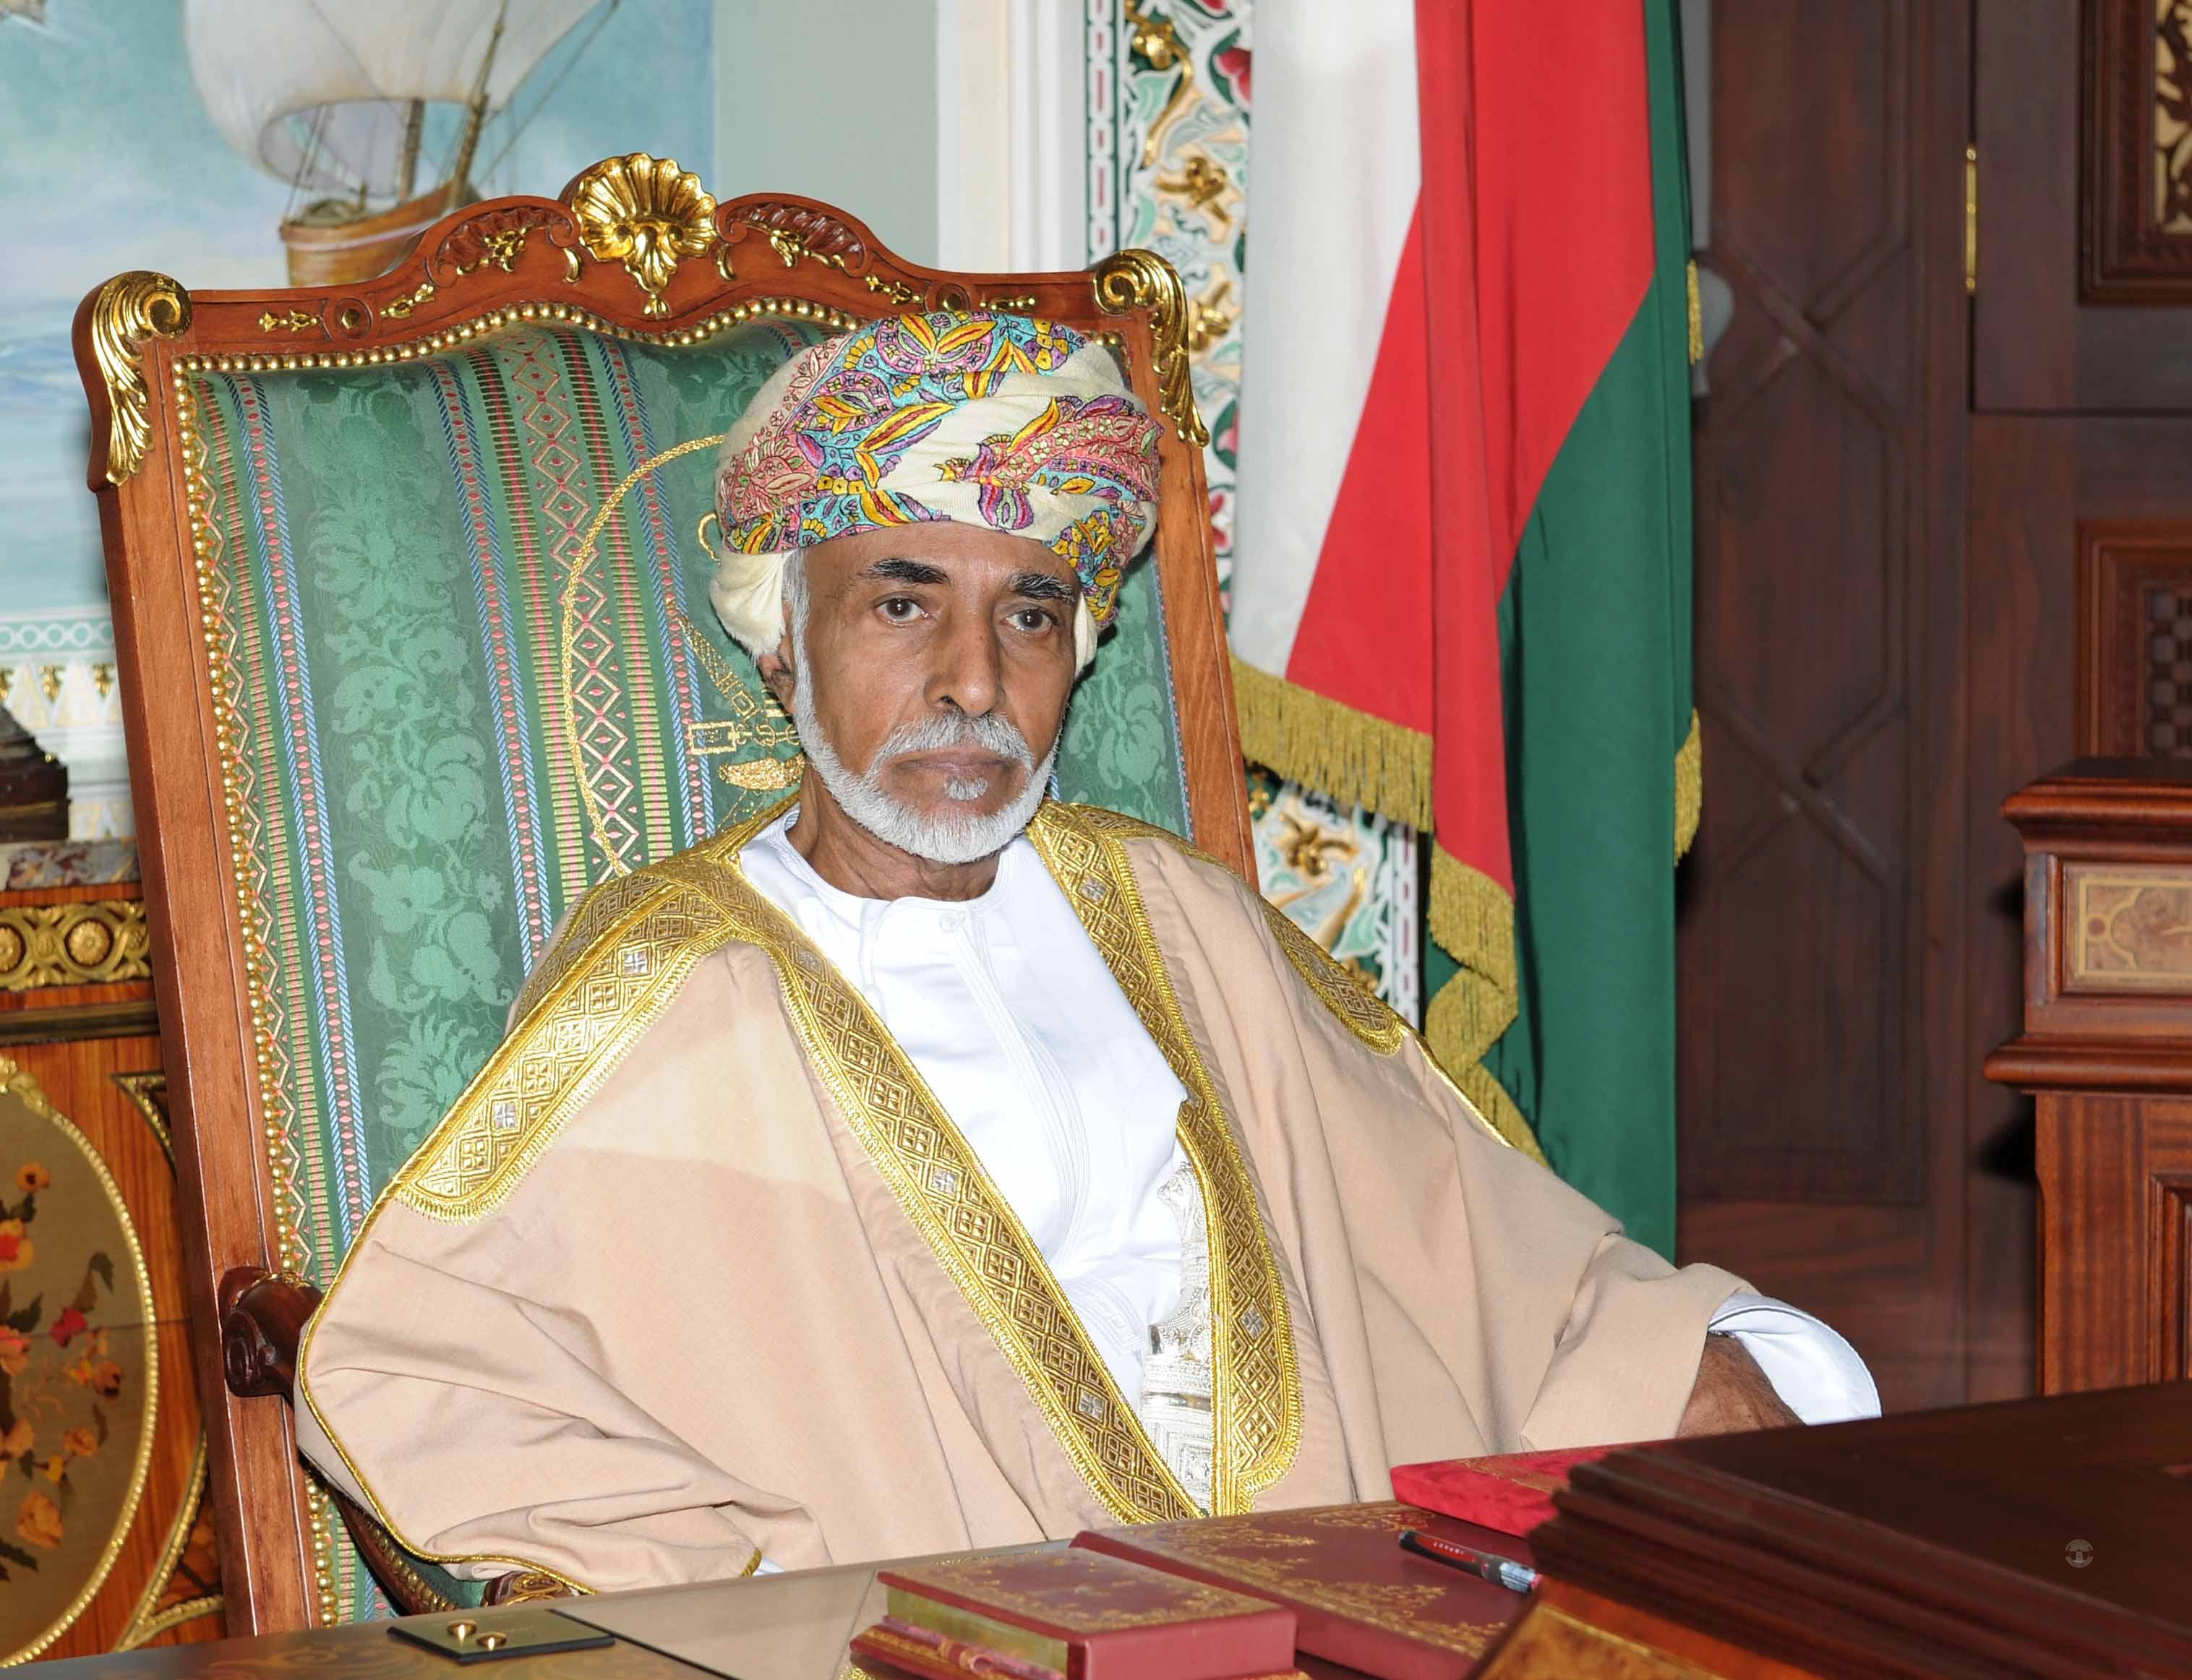 His Majesty Sultan Qaboos receives thanks from Saudi Arabia and Japan